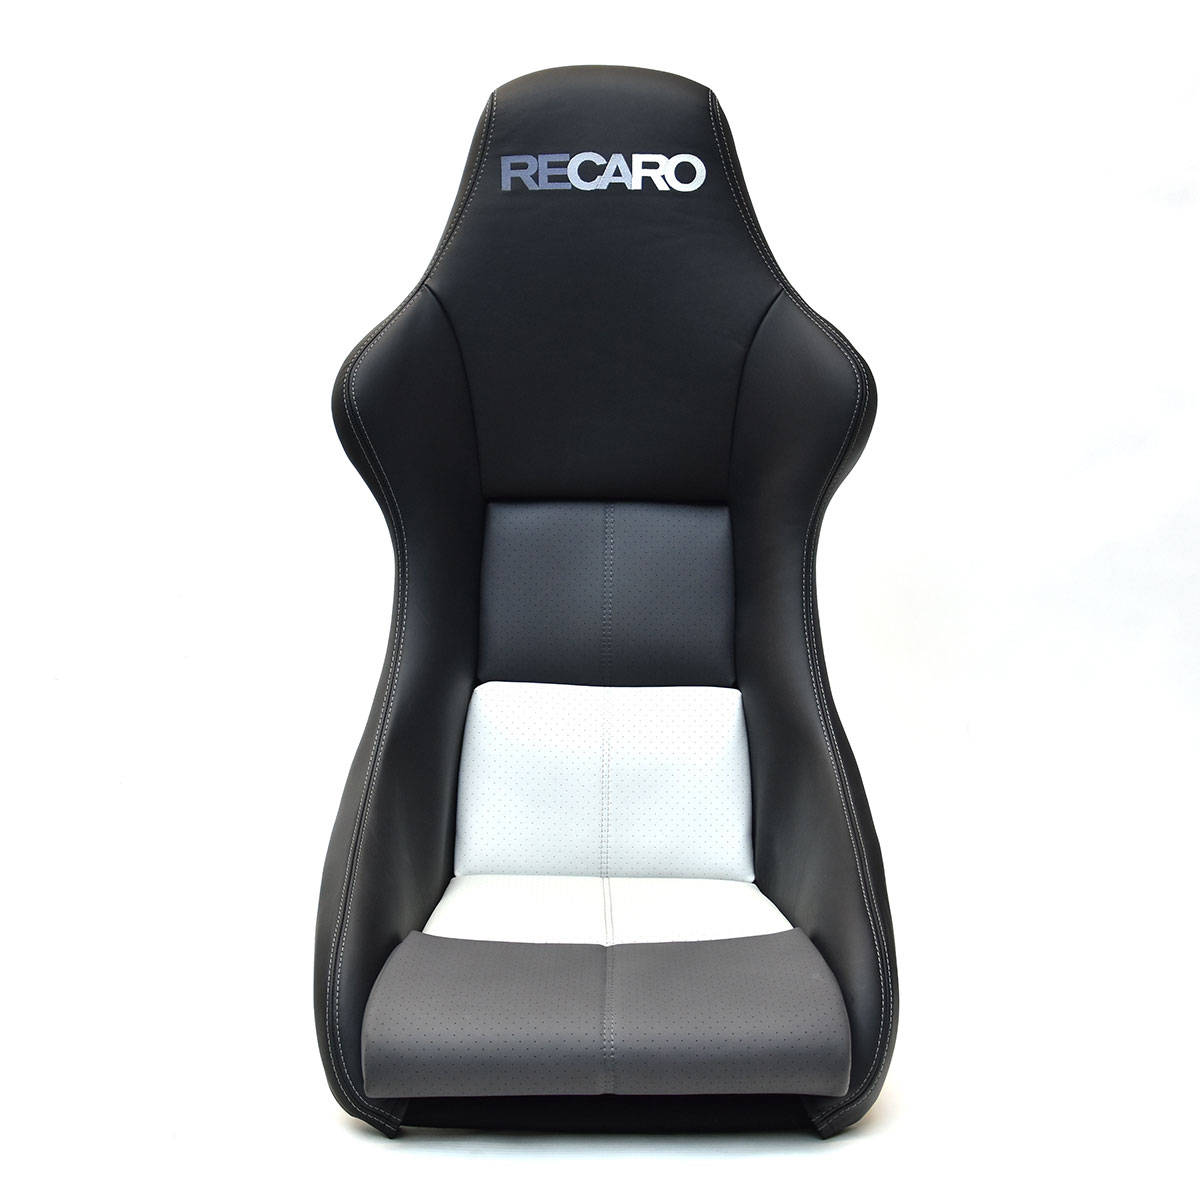 https://static1.carbone.pl/eng_pl_Seat-cushions-for-RECARO-POLE-POSITION-4117_9.jpg